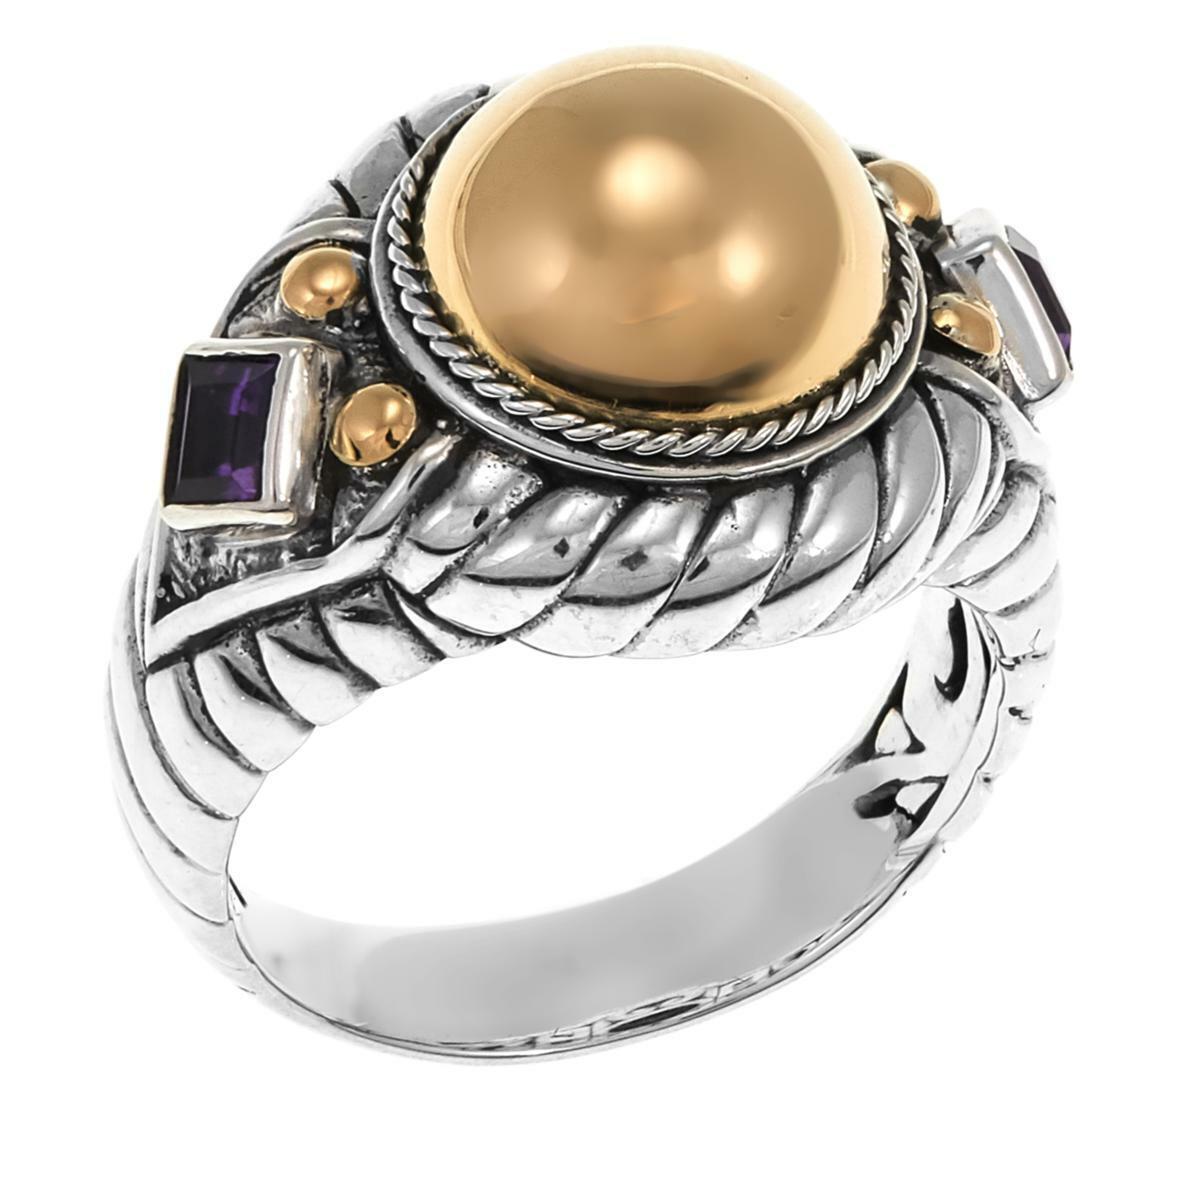 Bali Designs 2-Tone 0.22Ctw Amethyst Cable-Twist Ring Size 12 Hsn $221